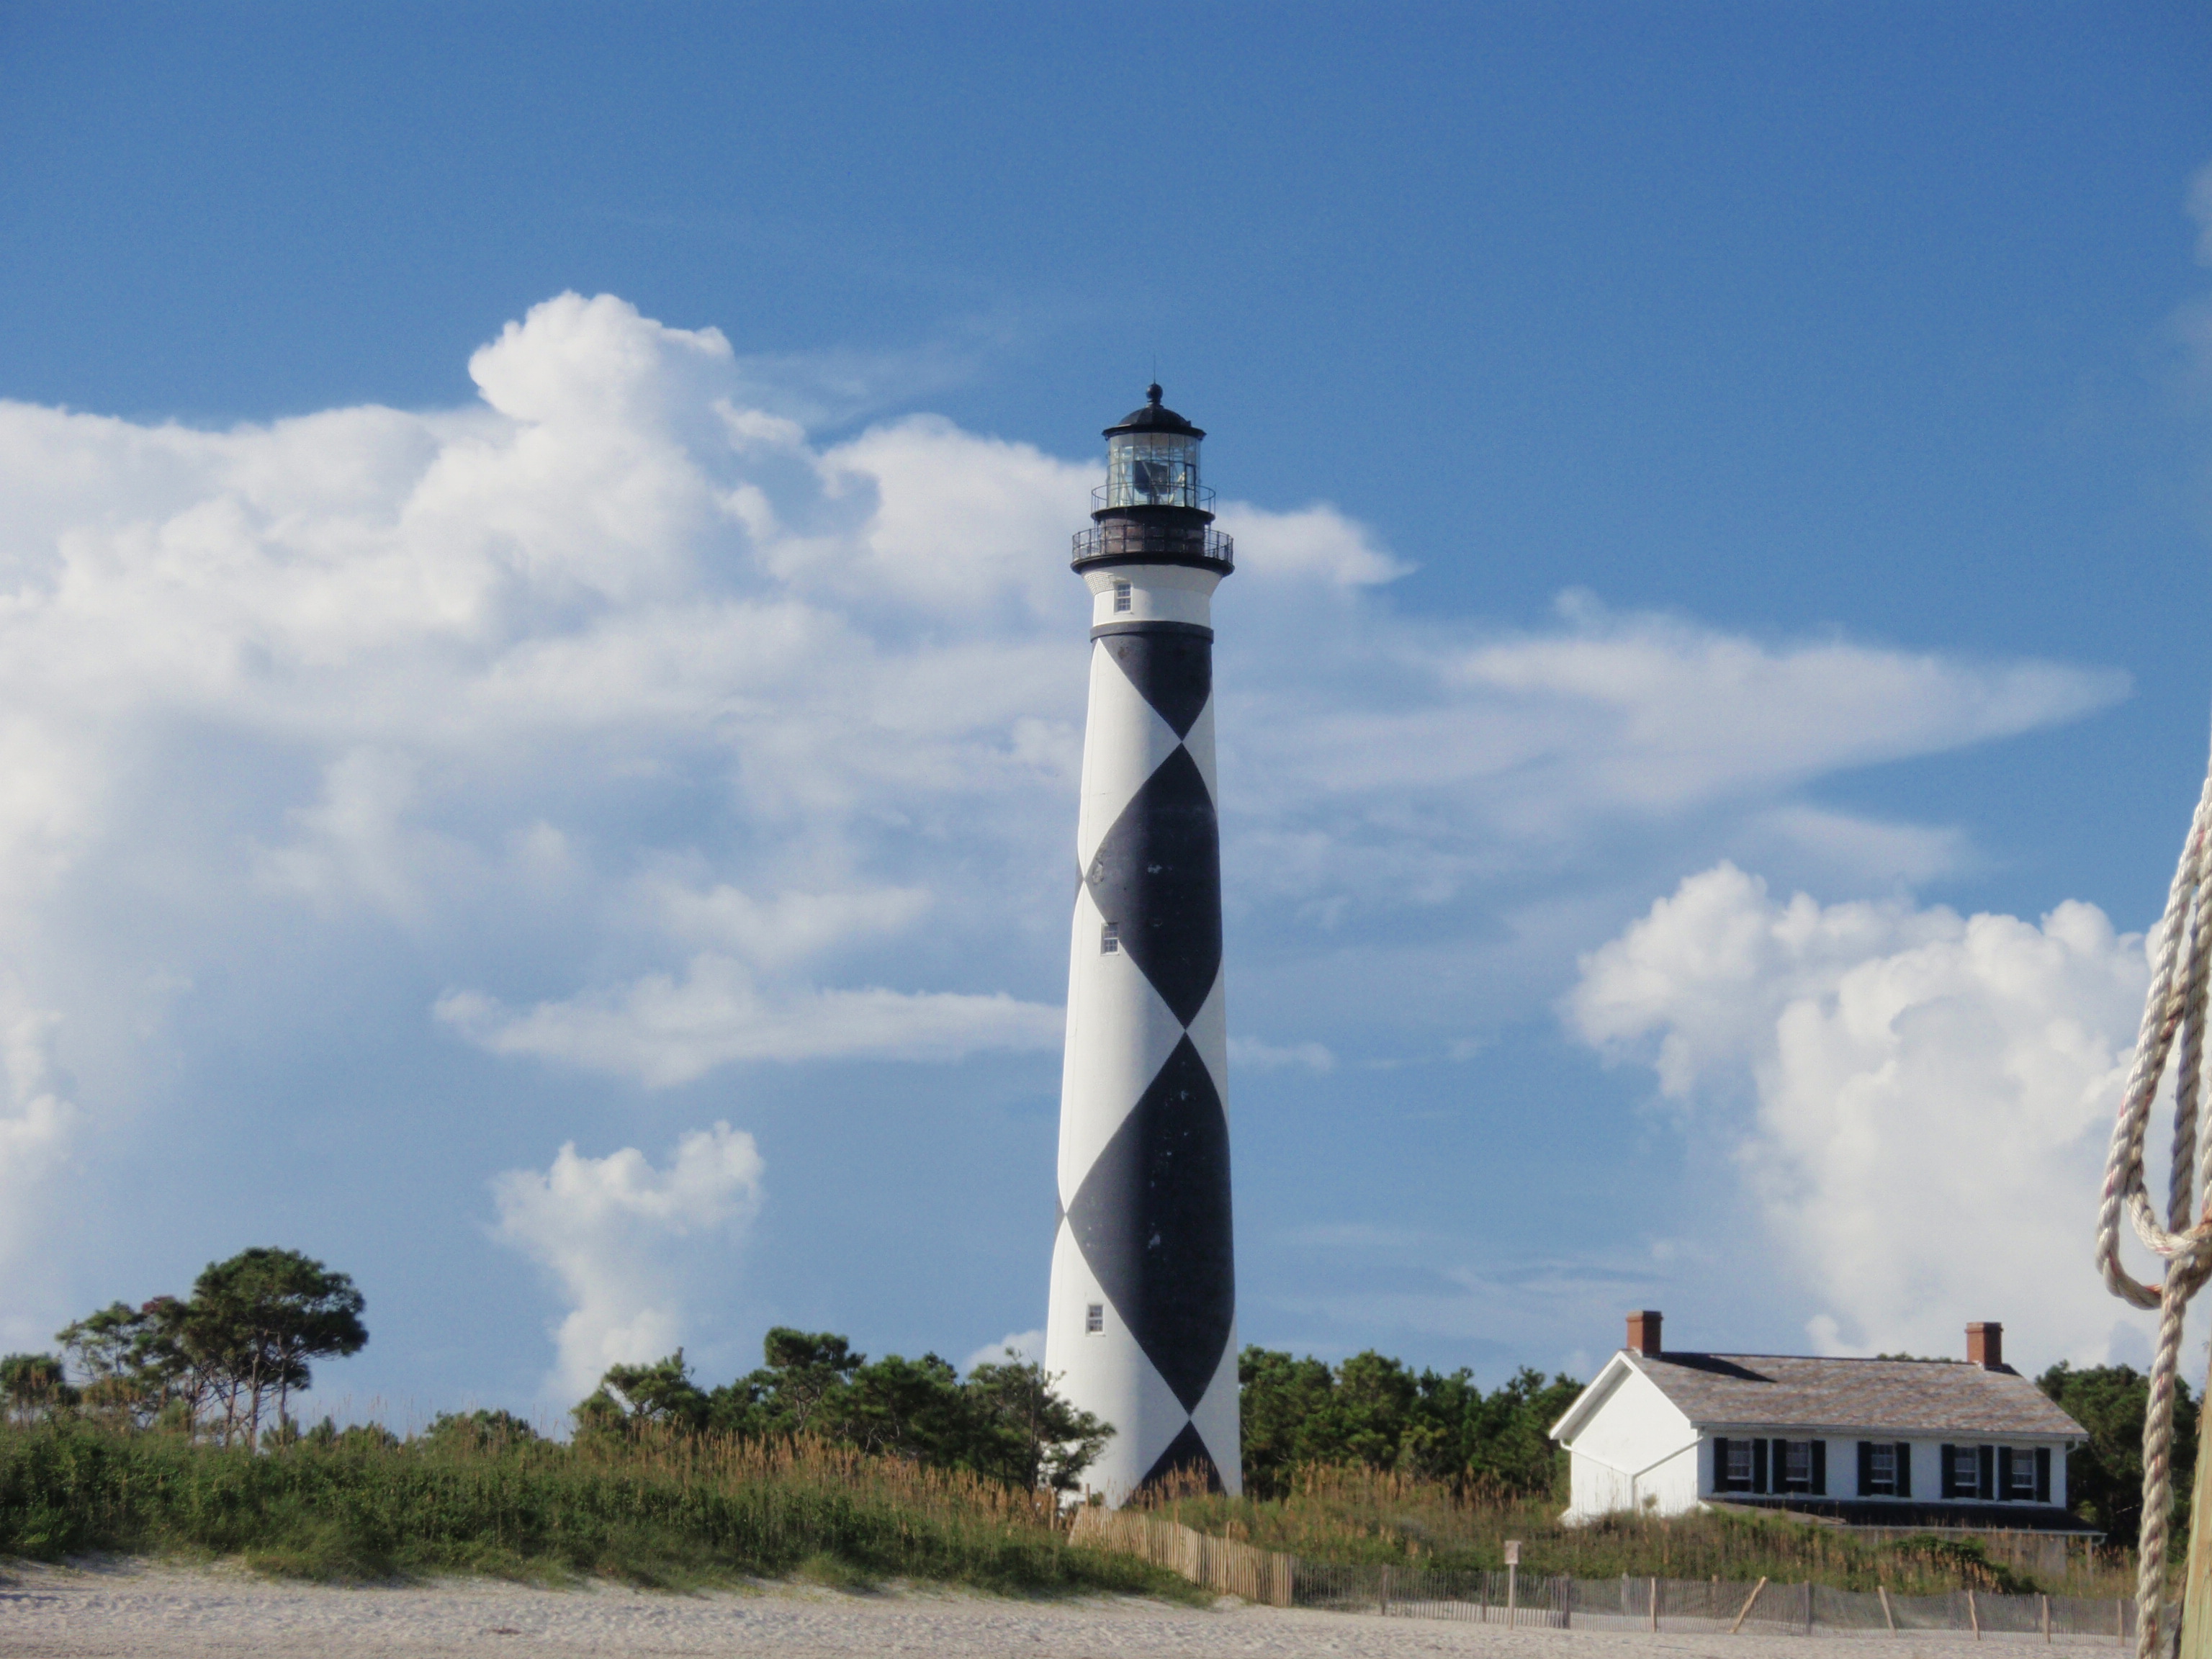 : Black & white patterned tower of the Cape Lookout Lighthouse stands against a blue & white cloud f